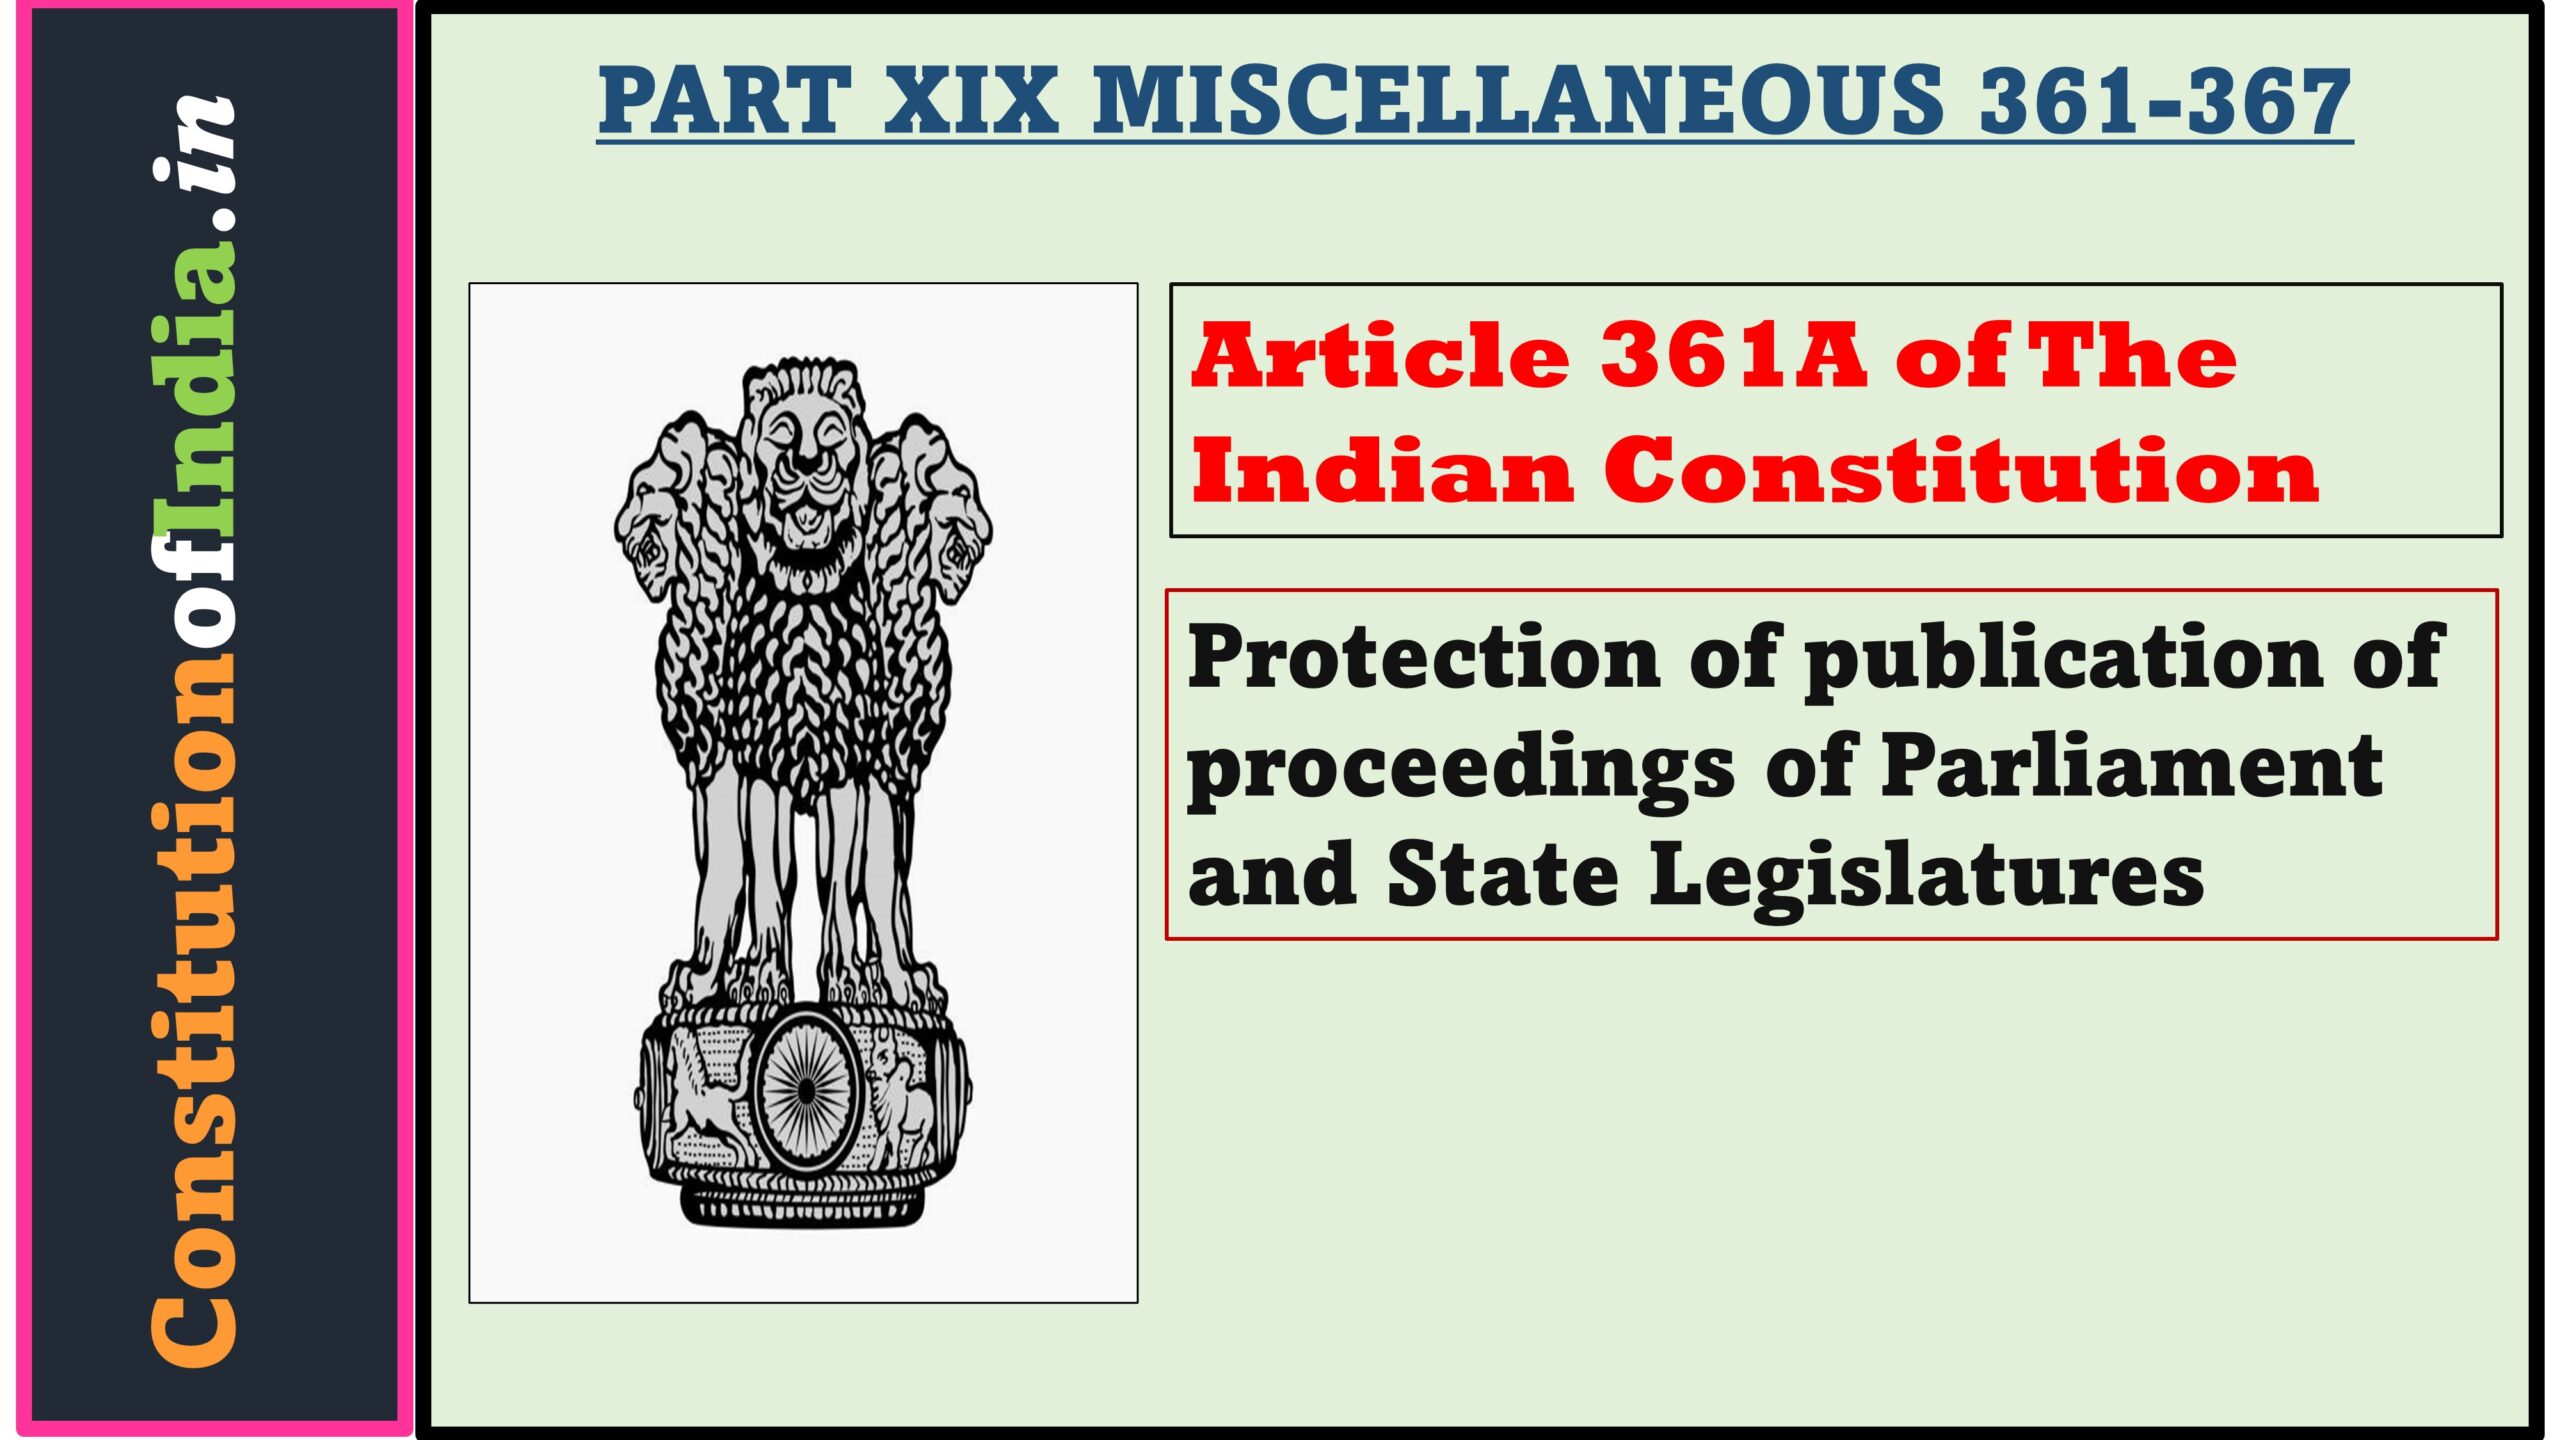 Article 361A of The Indian Constitution